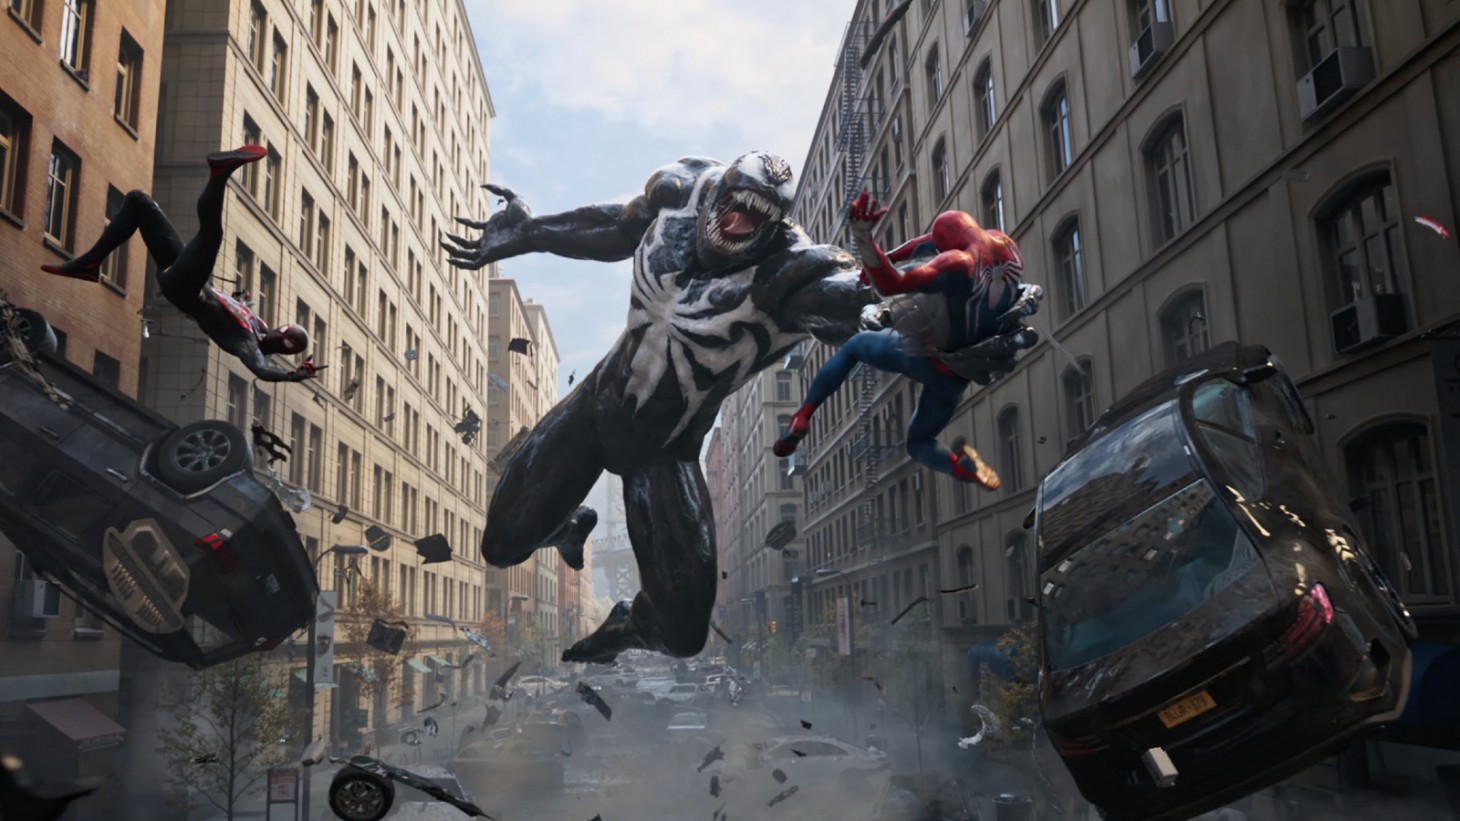 Unwrapping Marvel's Spider-Man 2's Latest Cinematic Trailer by PlayStation and the Electrifying Clash with Venom